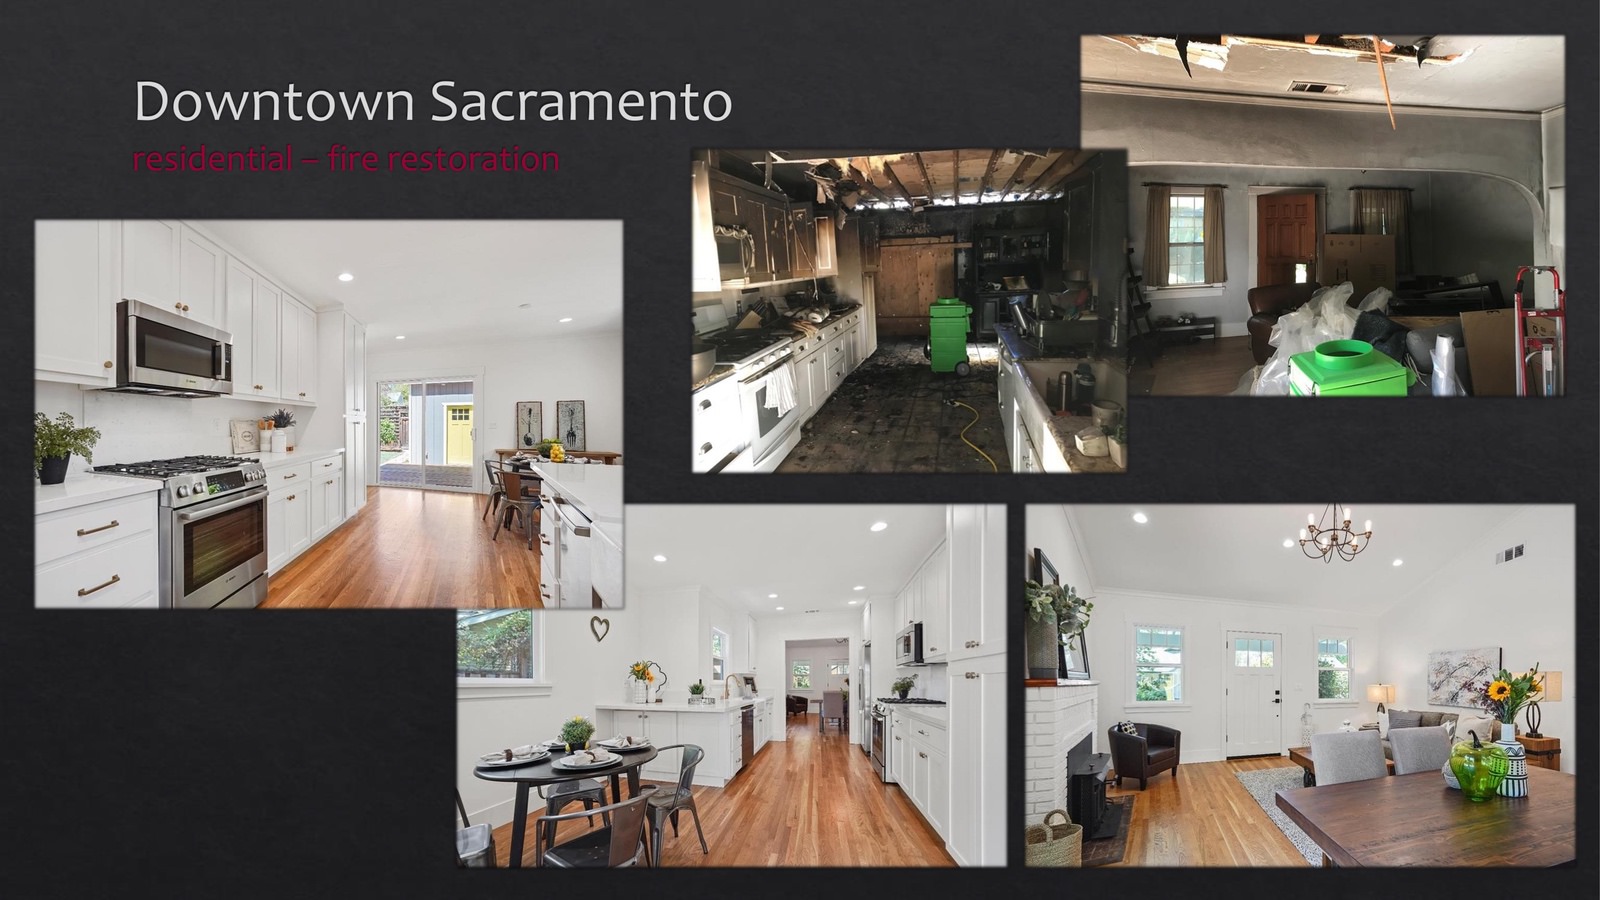 Downtown Sacramento Residential fire restoration - kitchen and livingroom